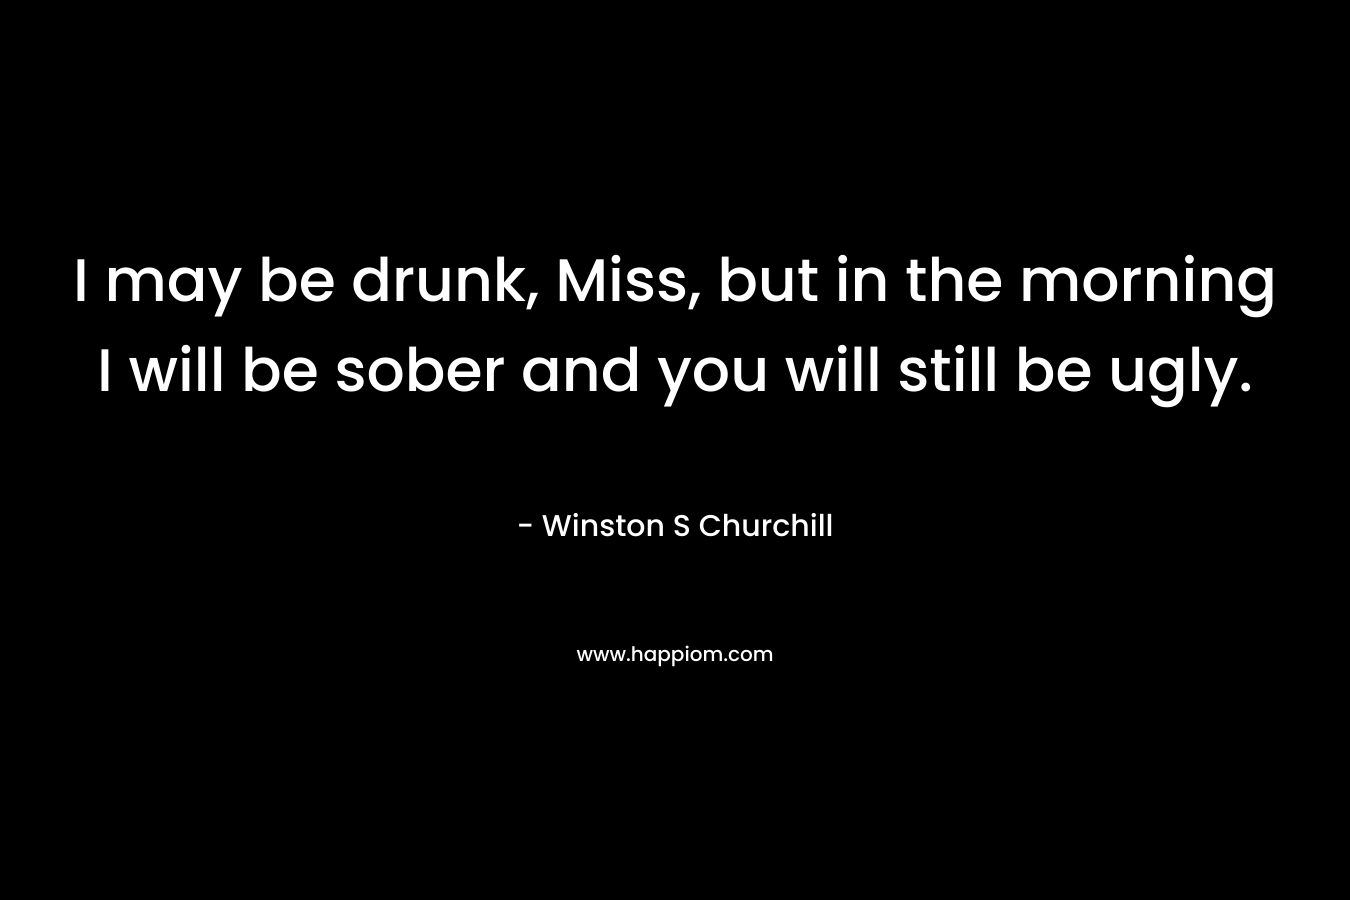 I may be drunk, Miss, but in the morning I will be sober and you will still be ugly. – Winston S Churchill